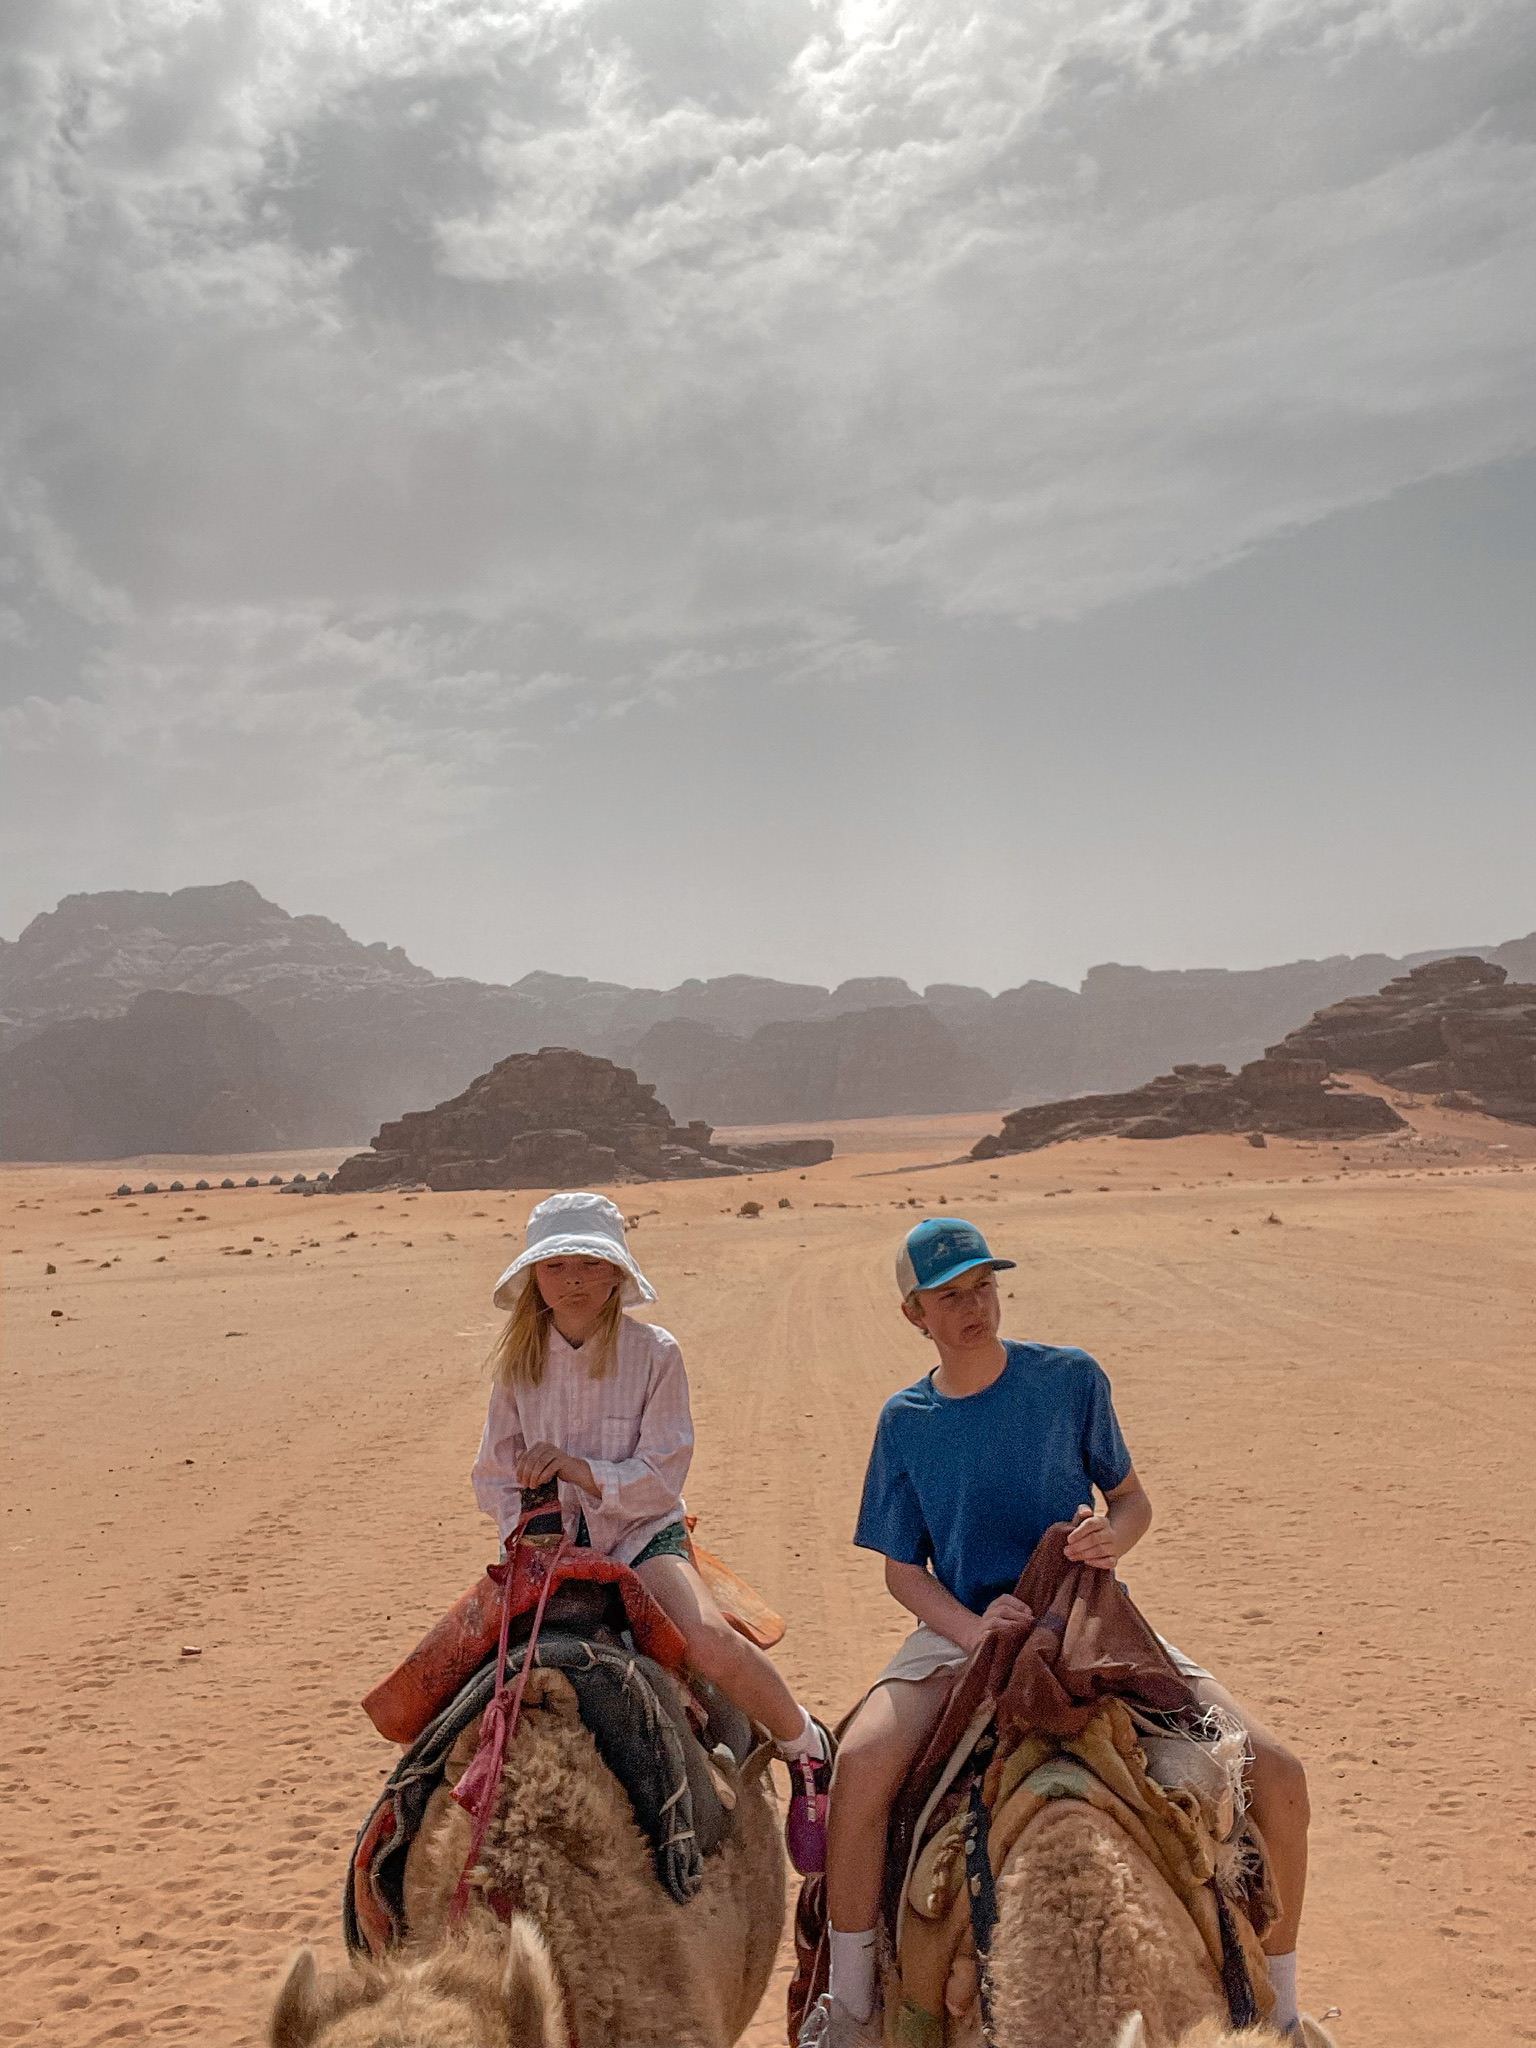 planning a trip to the middle east, where to go in the middle east, how to plan a trip to the middle east, Jordan, Jordan Desert, erin busbee, busbee style, busbee family travels, Jordan Desert trip, explore jordan desert, camel rides in jordan desert, wadi rum, Valley of the moon